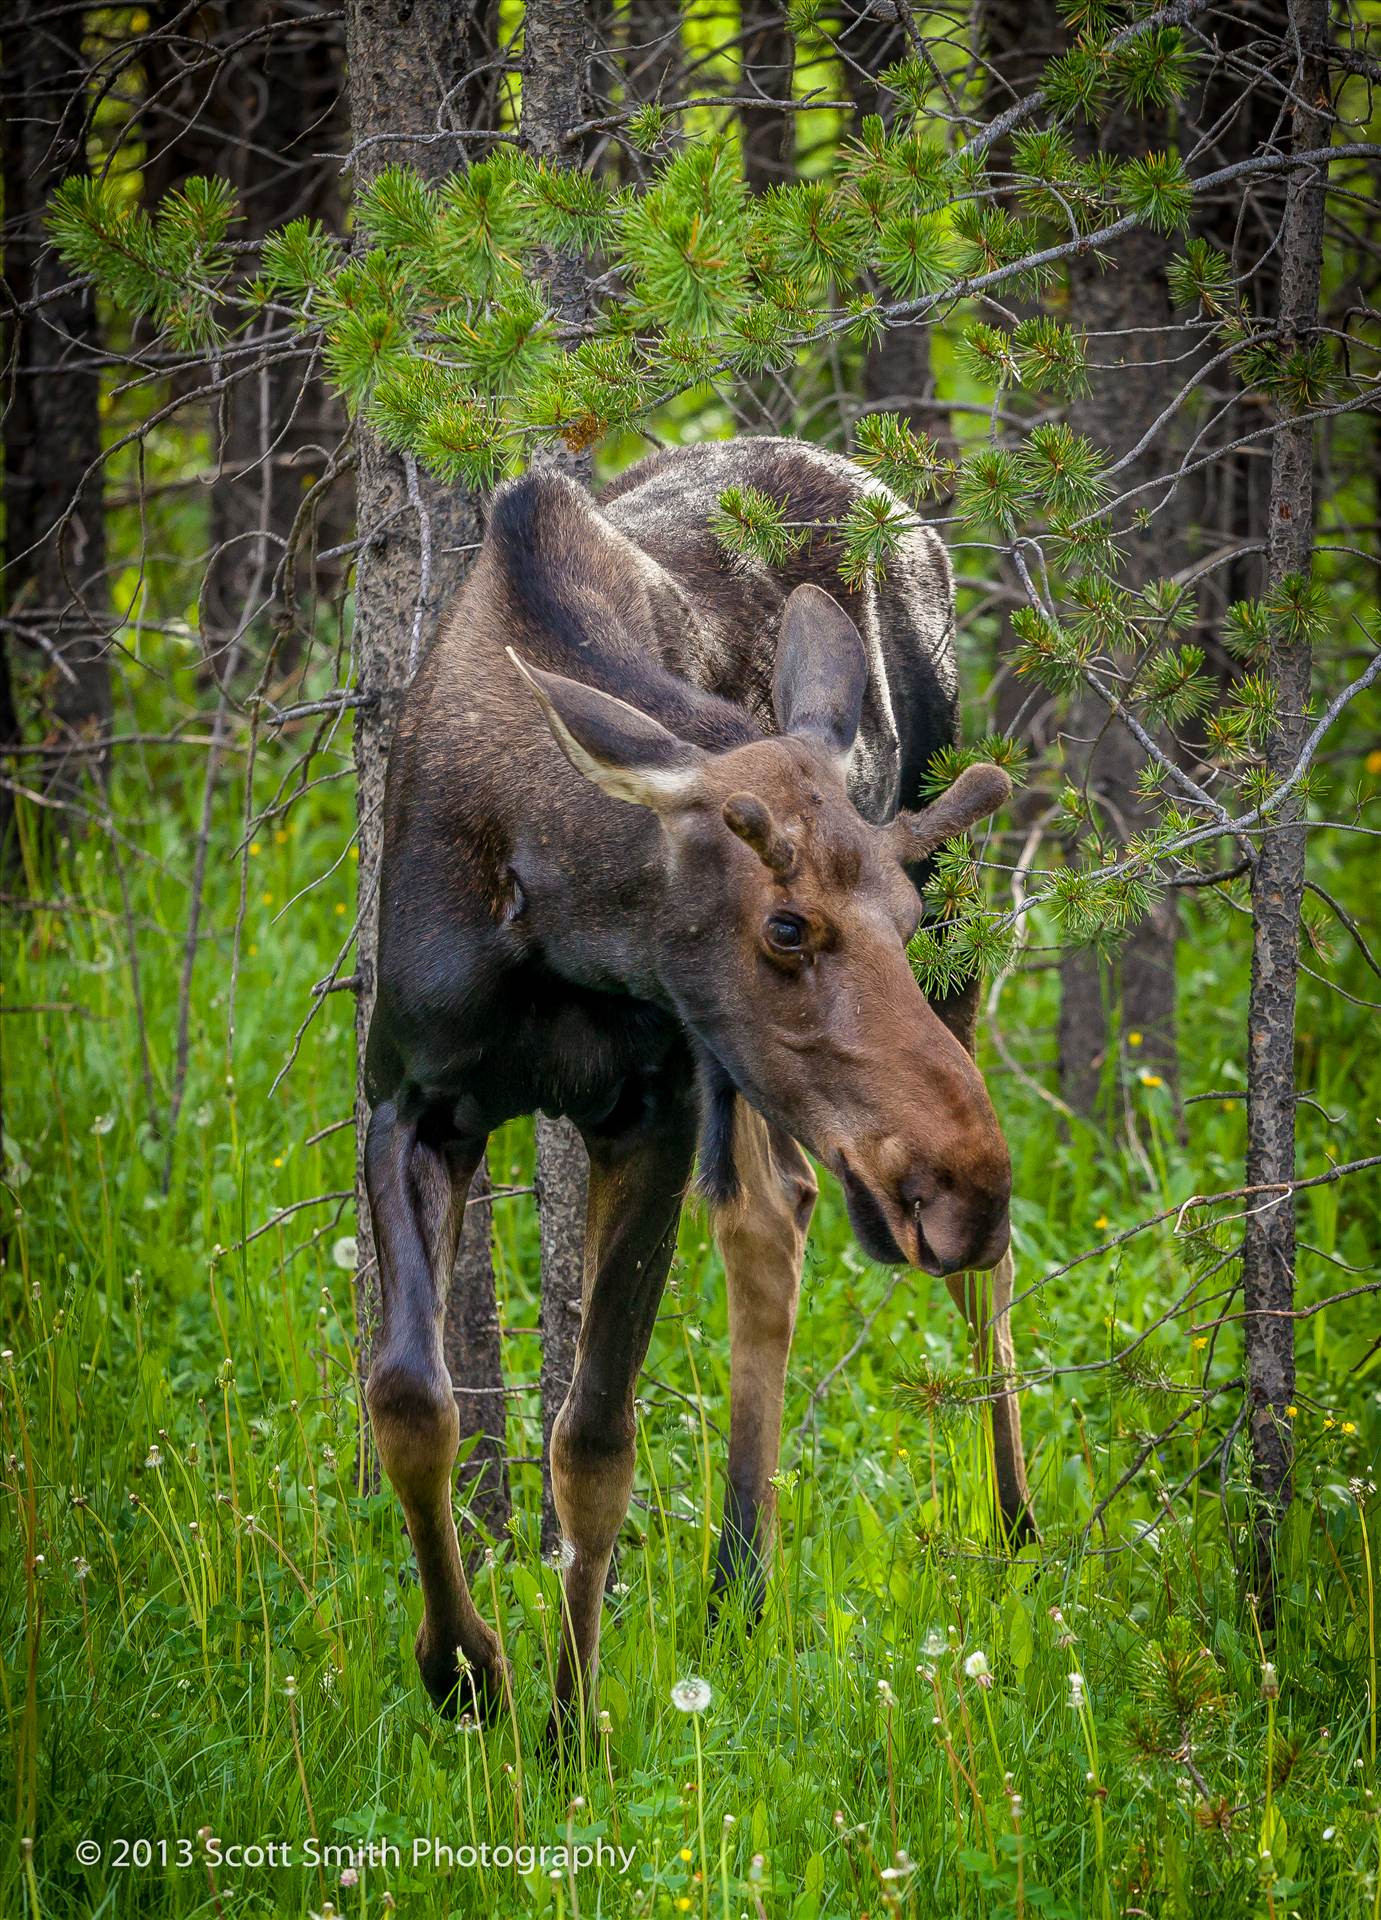 Rocky Mountain Moose I ended up much closer to this beautiful beast than I meant to… Sometimes when you’re looking through a lens you lose perspective. by Scott Smith Photos